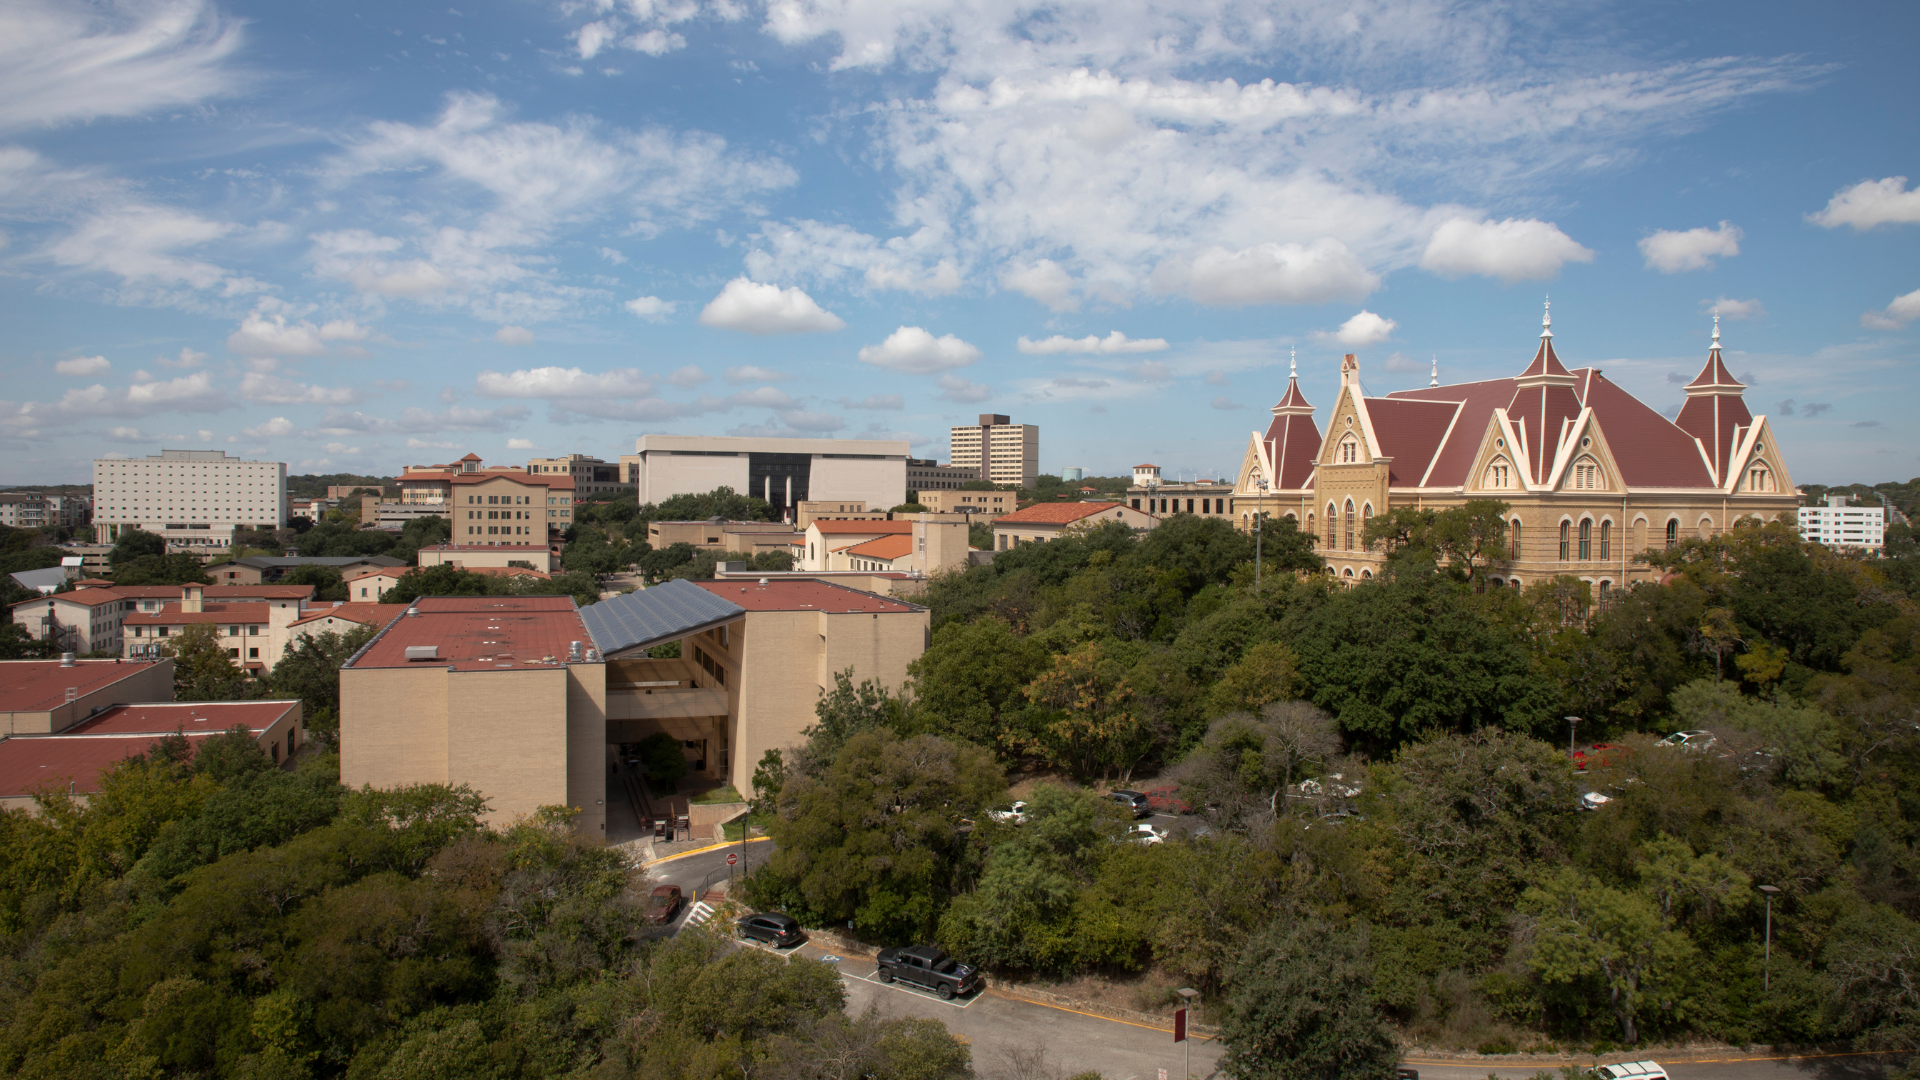 A campus shot featuring Old Main and other buildings on a beautiful sunny day.